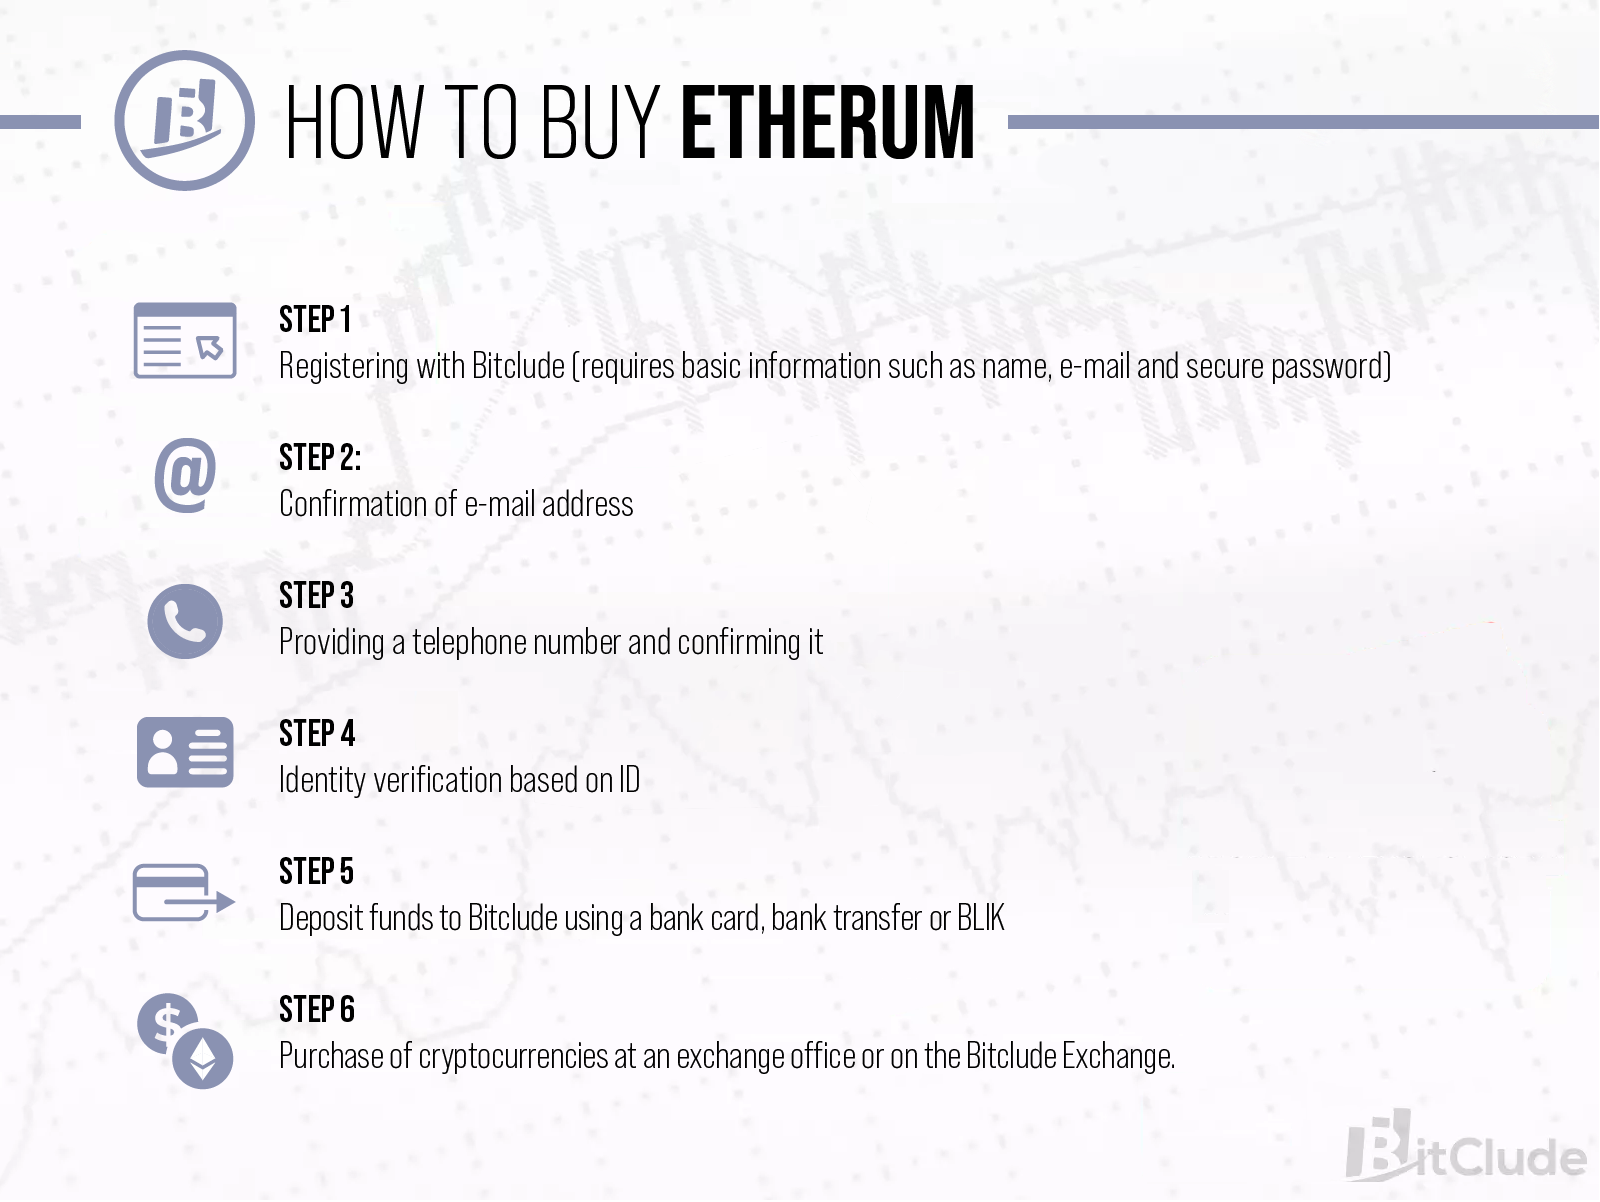 Buying Ethereum is just 6 steps. From registering an account on Bitclude, all the way to depositing funds and purchasing cryptocurrencies.